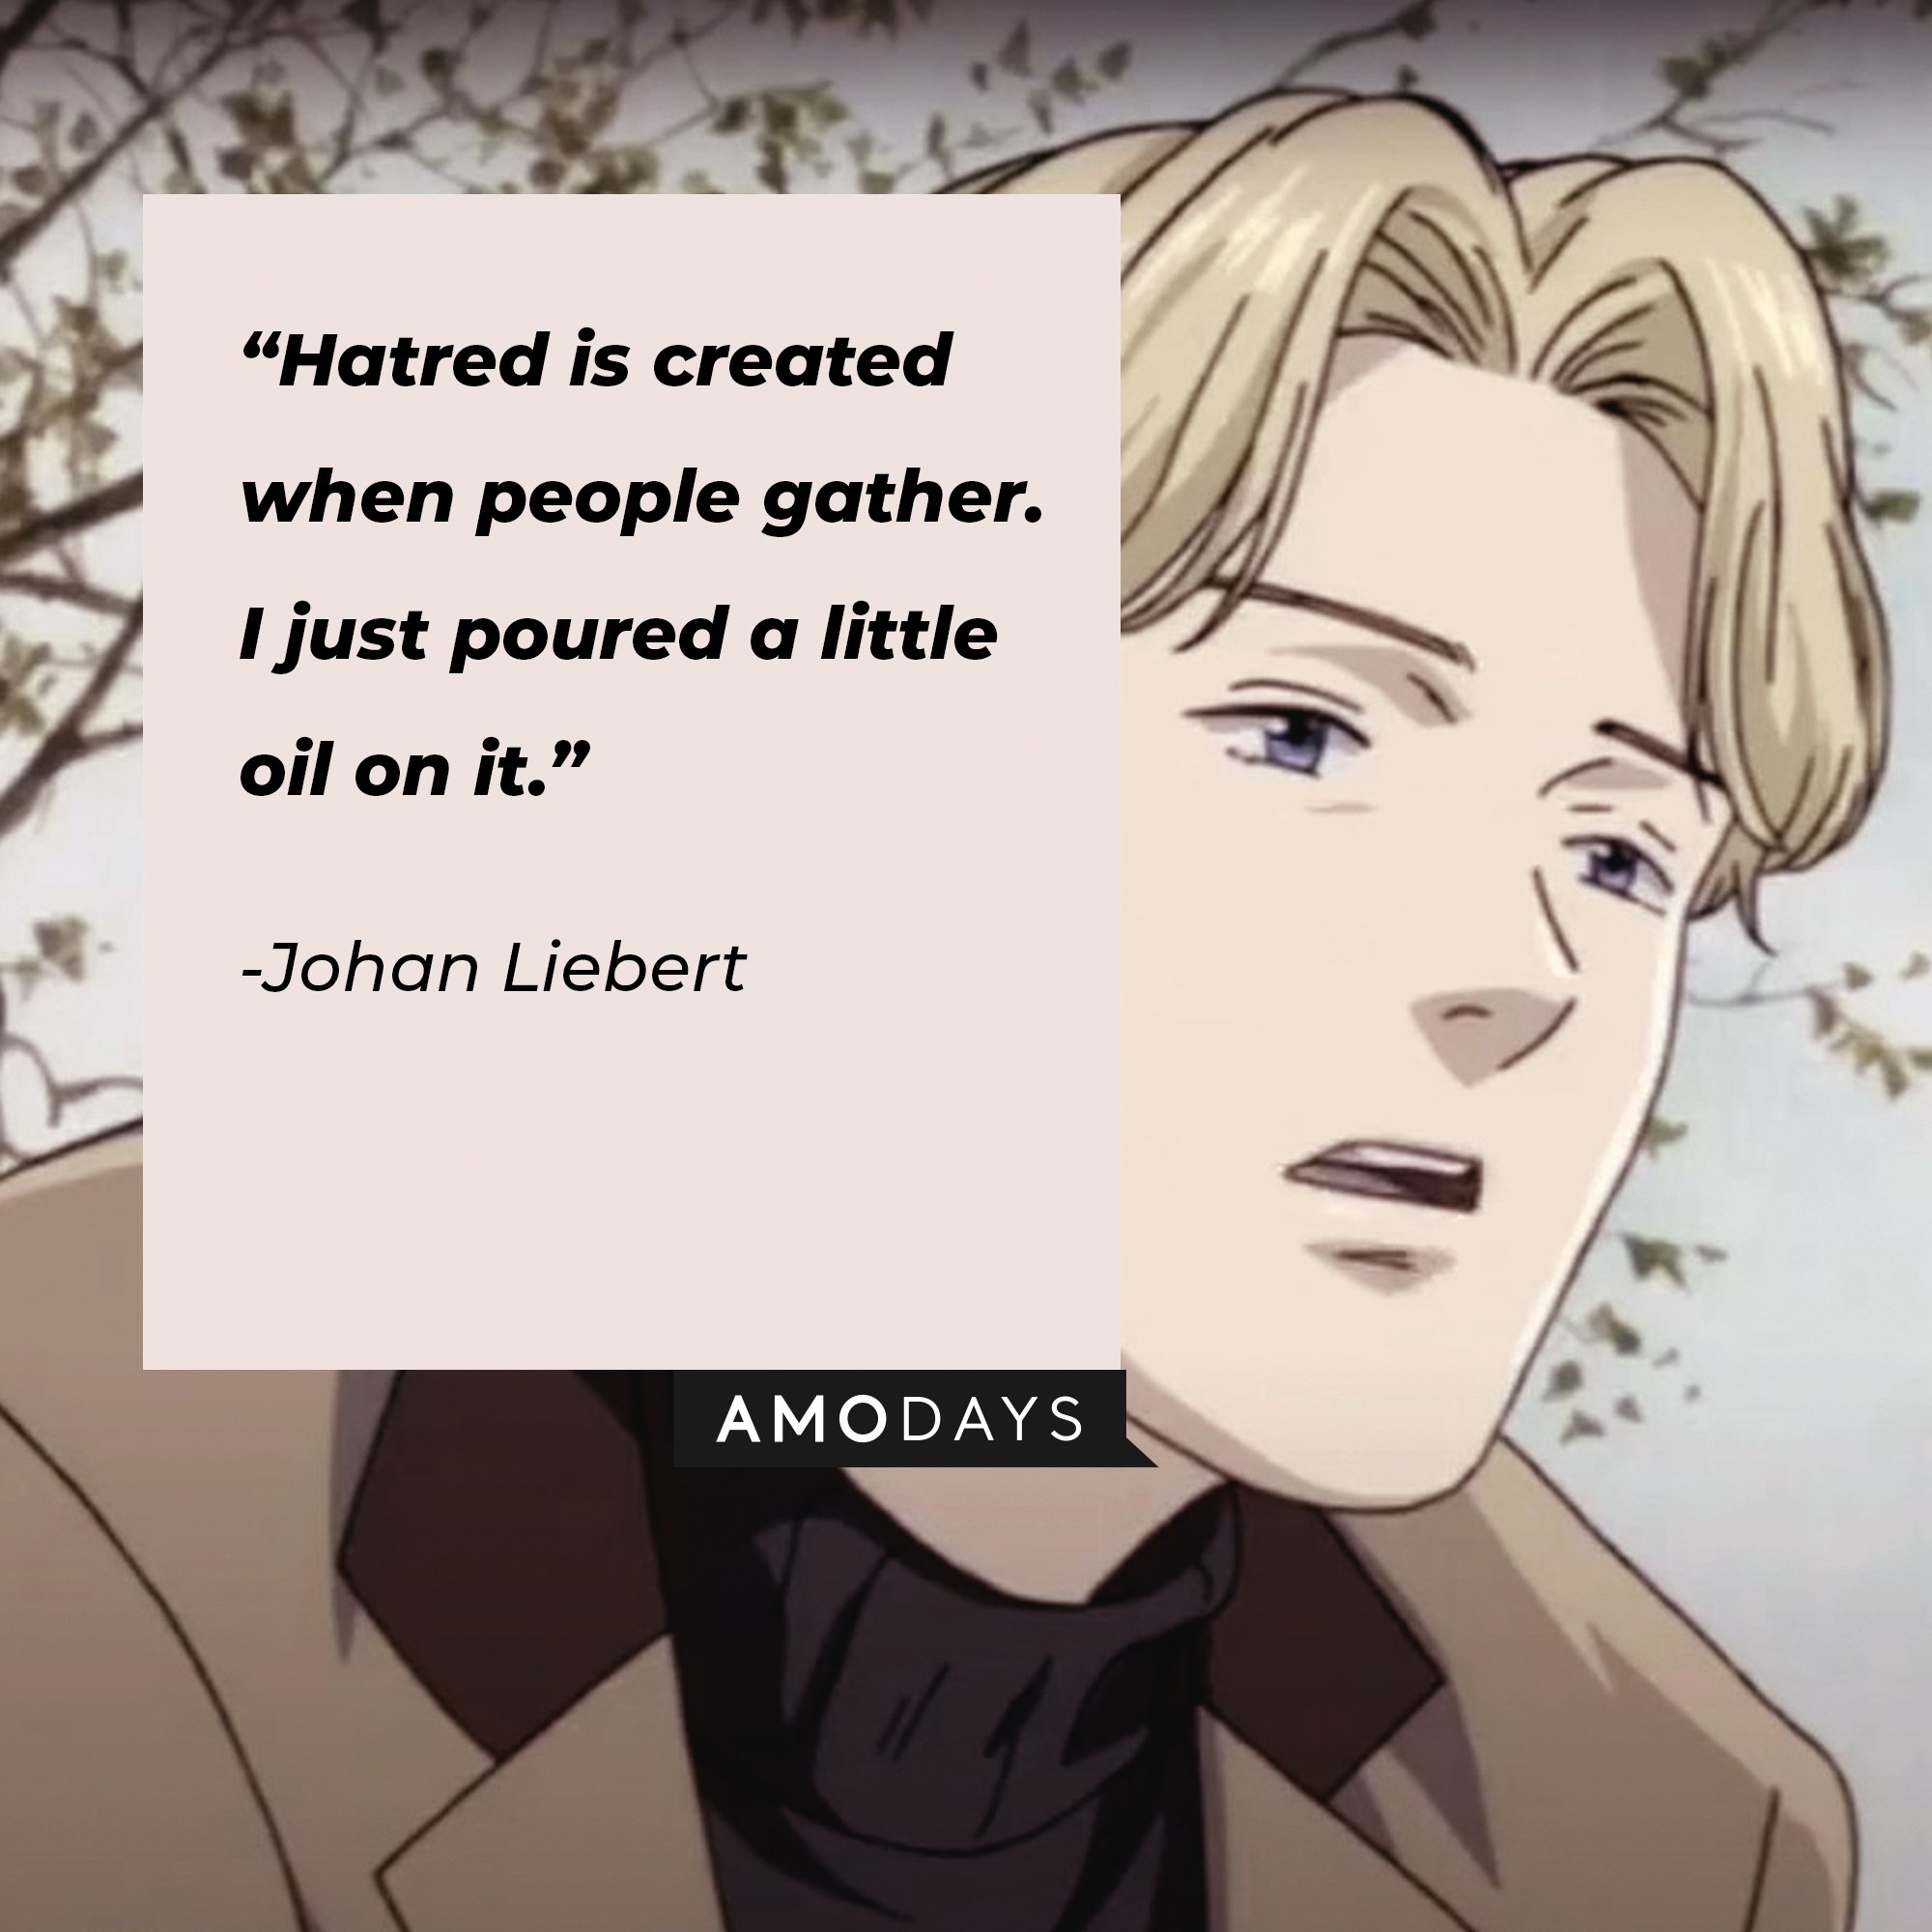 Johan Liebert’s quote: “Hatred is created when people gather. I just poured a little oil on it.” | Image: AmoDays